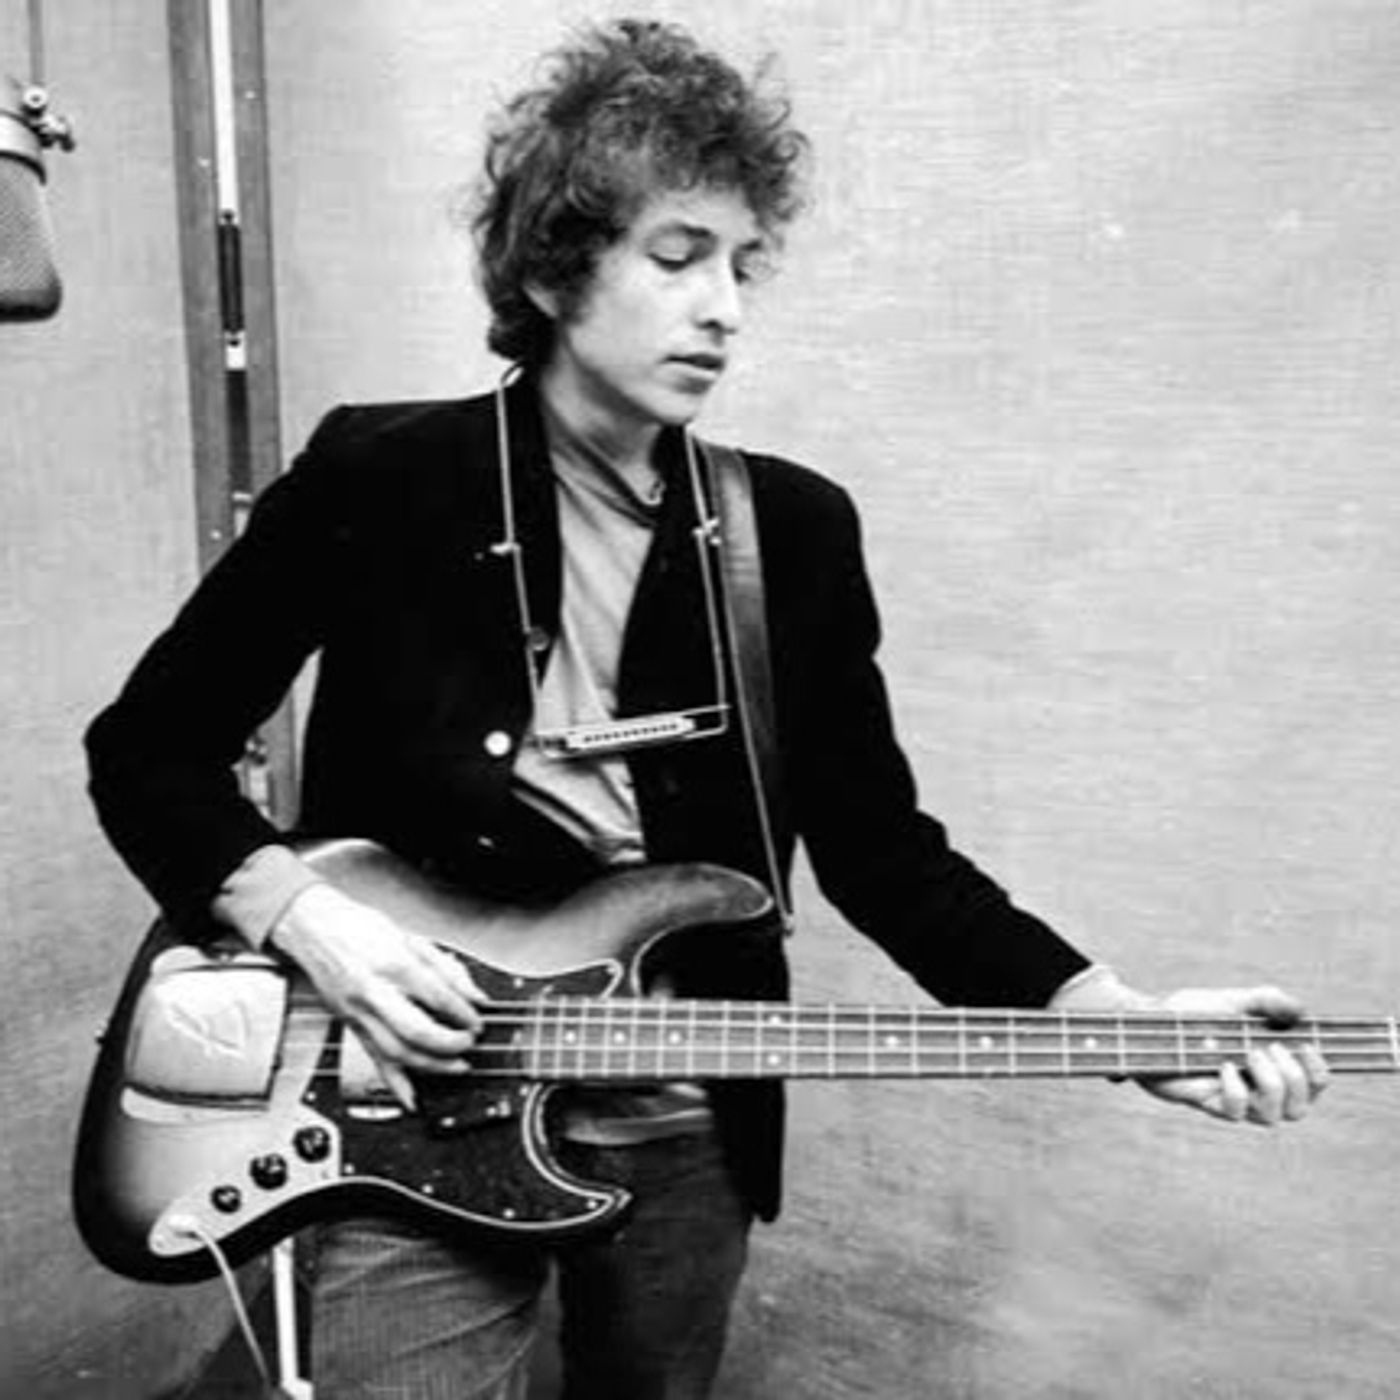 playlist_especial_sp_tour_29_50th_anniversary_collection_bob_dylan_70_pt02